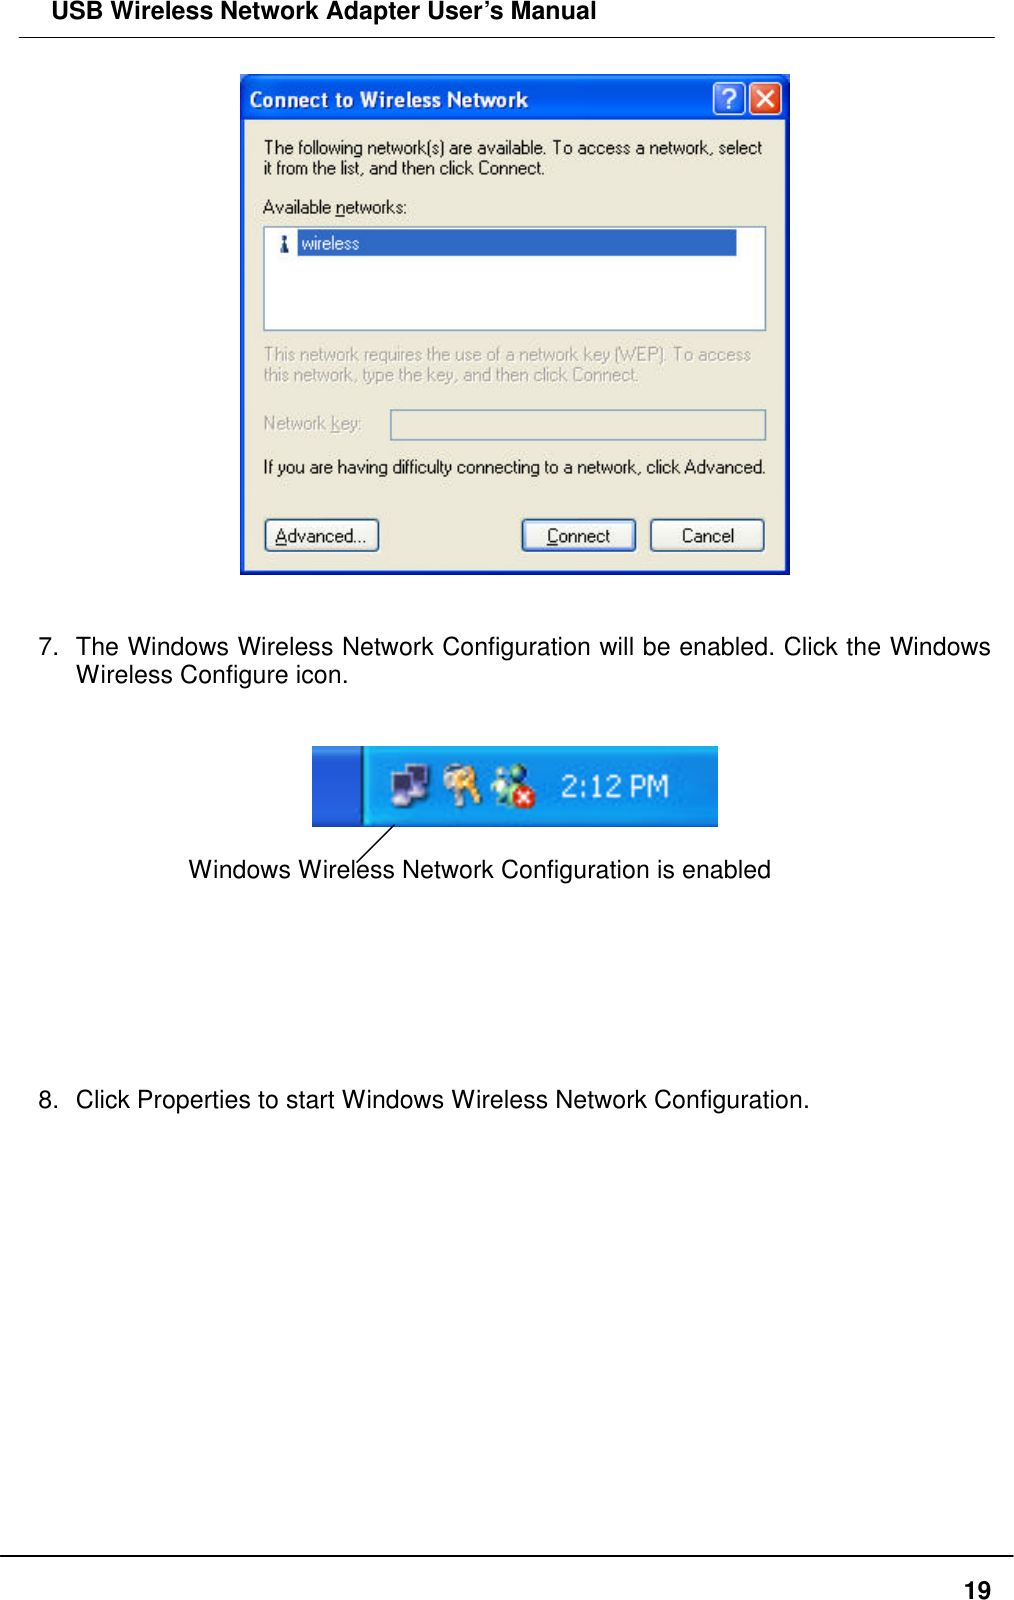  USB Wireless Network Adapter User’s Manual  19   7. The Windows Wireless Network Configuration will be enabled. Click the Windows Wireless Configure icon.     Windows Wireless Network Configuration is enabled        8. Click Properties to start Windows Wireless Network Configuration.   